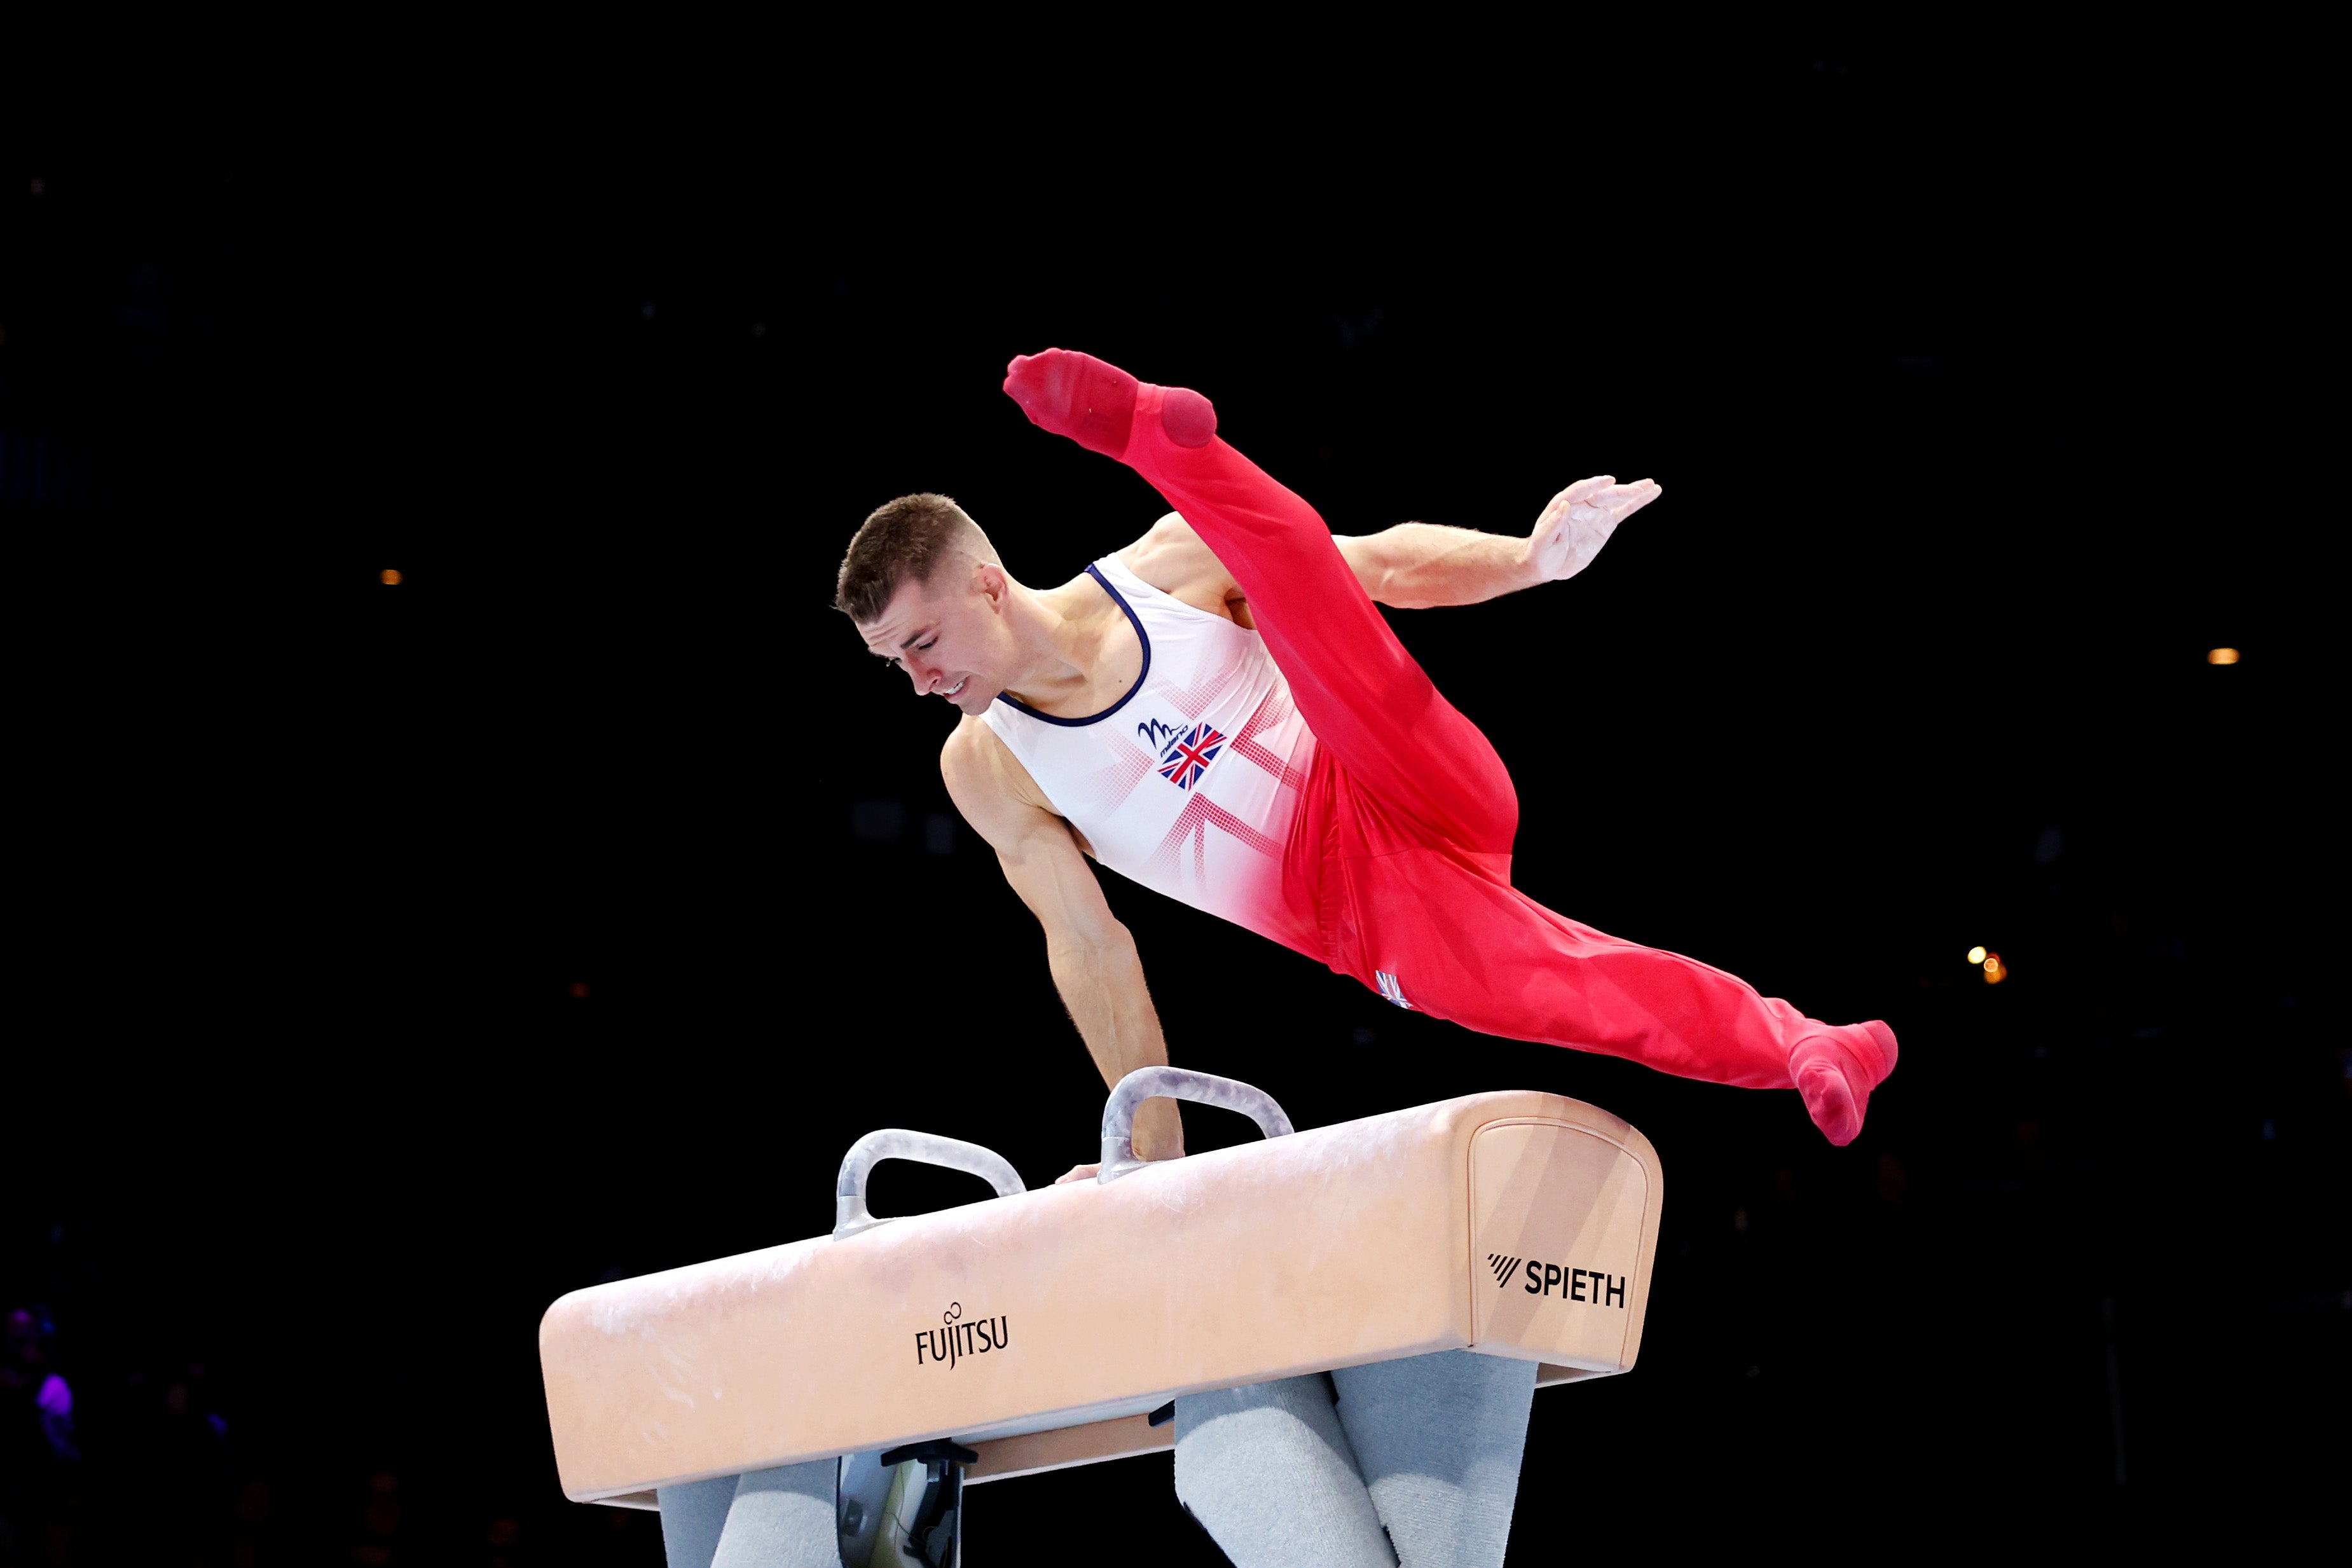 Max Whitlock of Team Great during the Men’s Pommel Horse Final in Antwerp